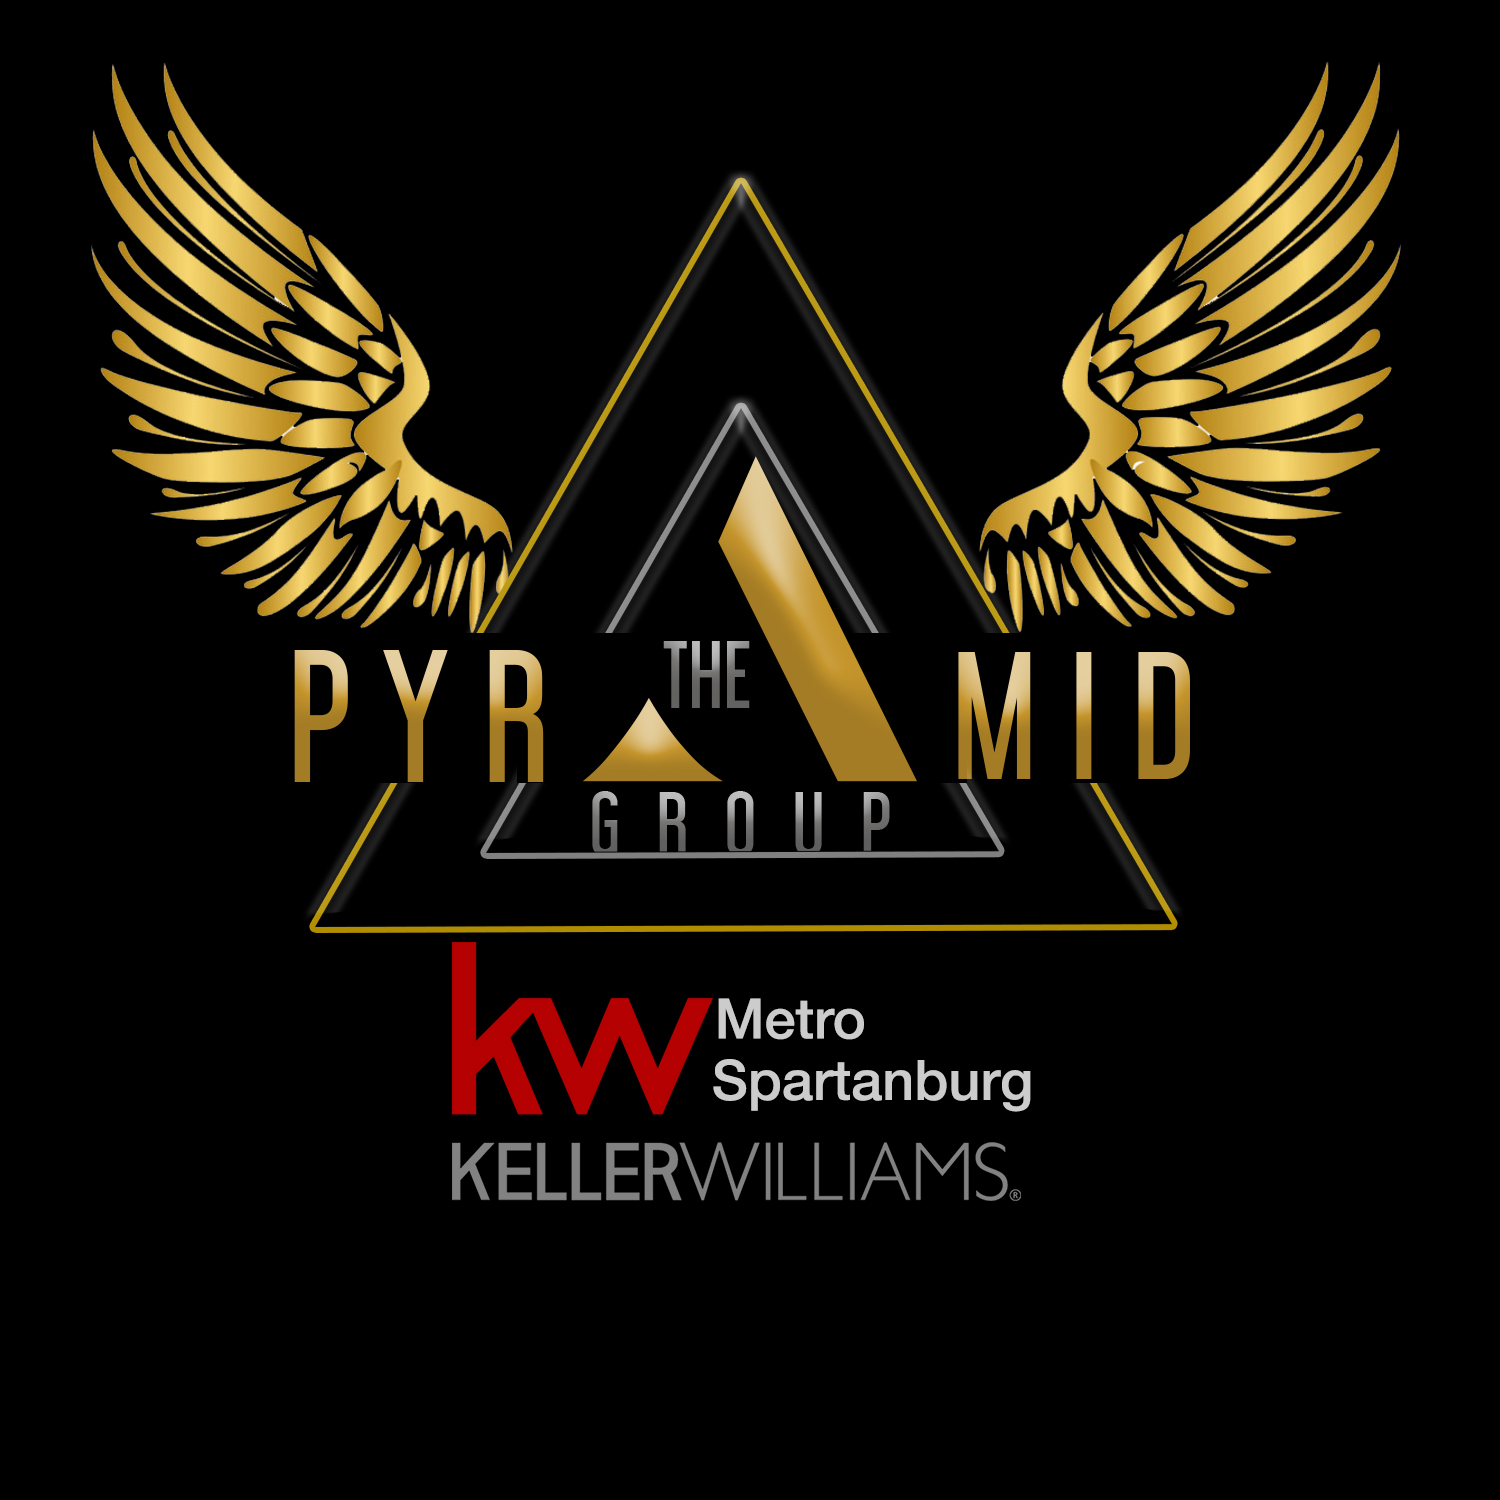 They Pyramid Group KW Logo - June 2022